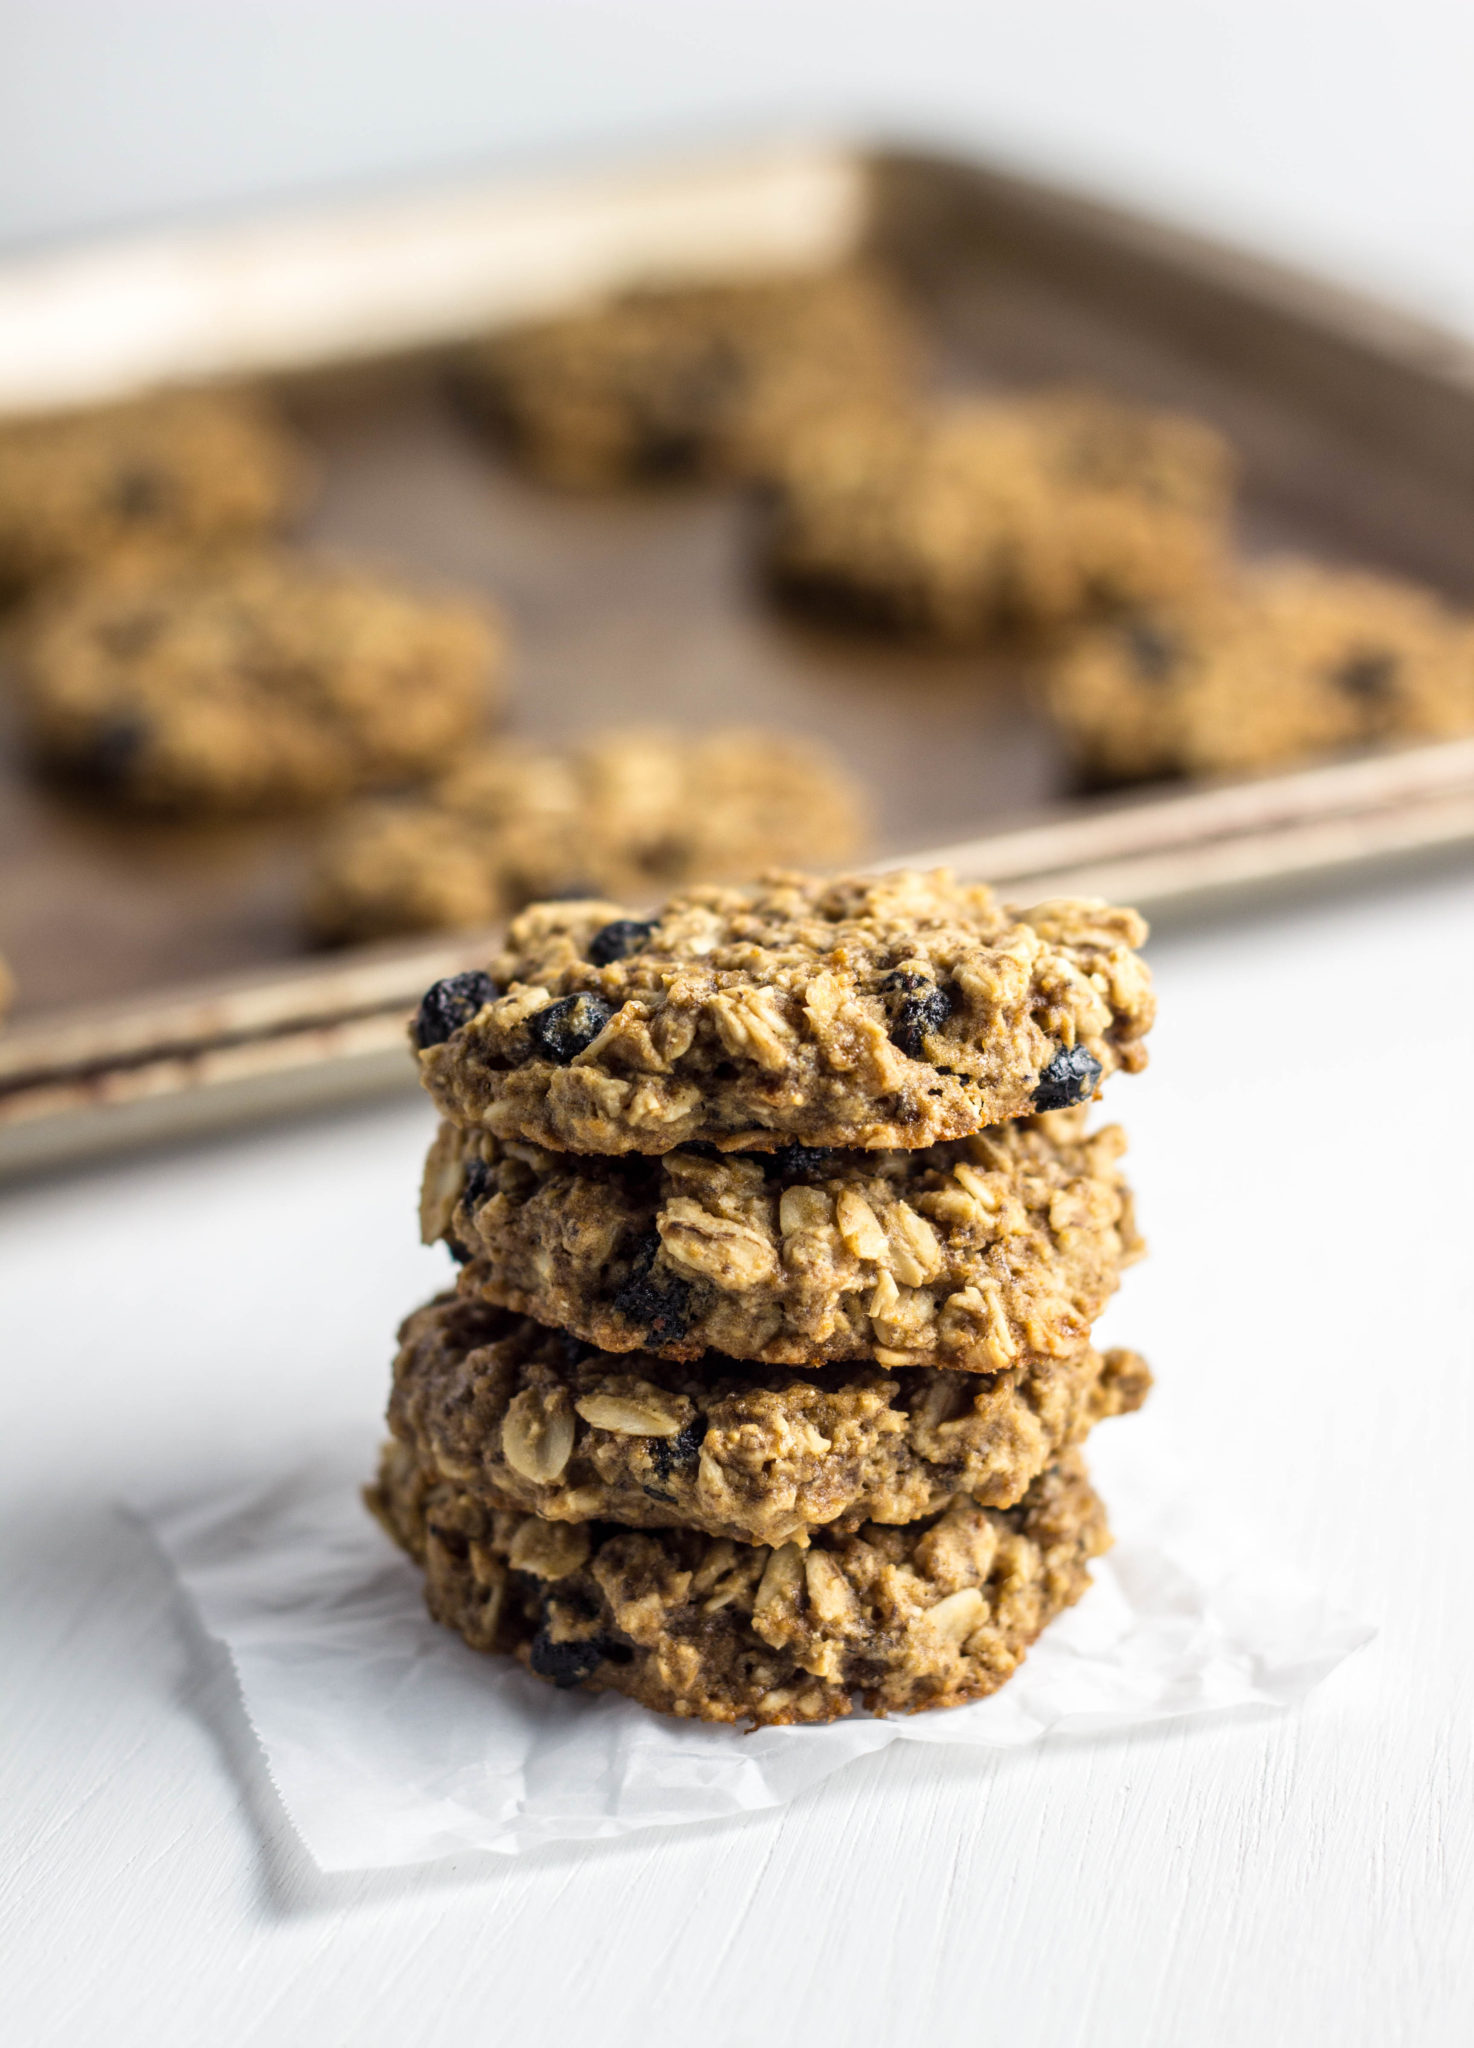 Stack of Gluten Free Blueberry Oatmeal Cookies